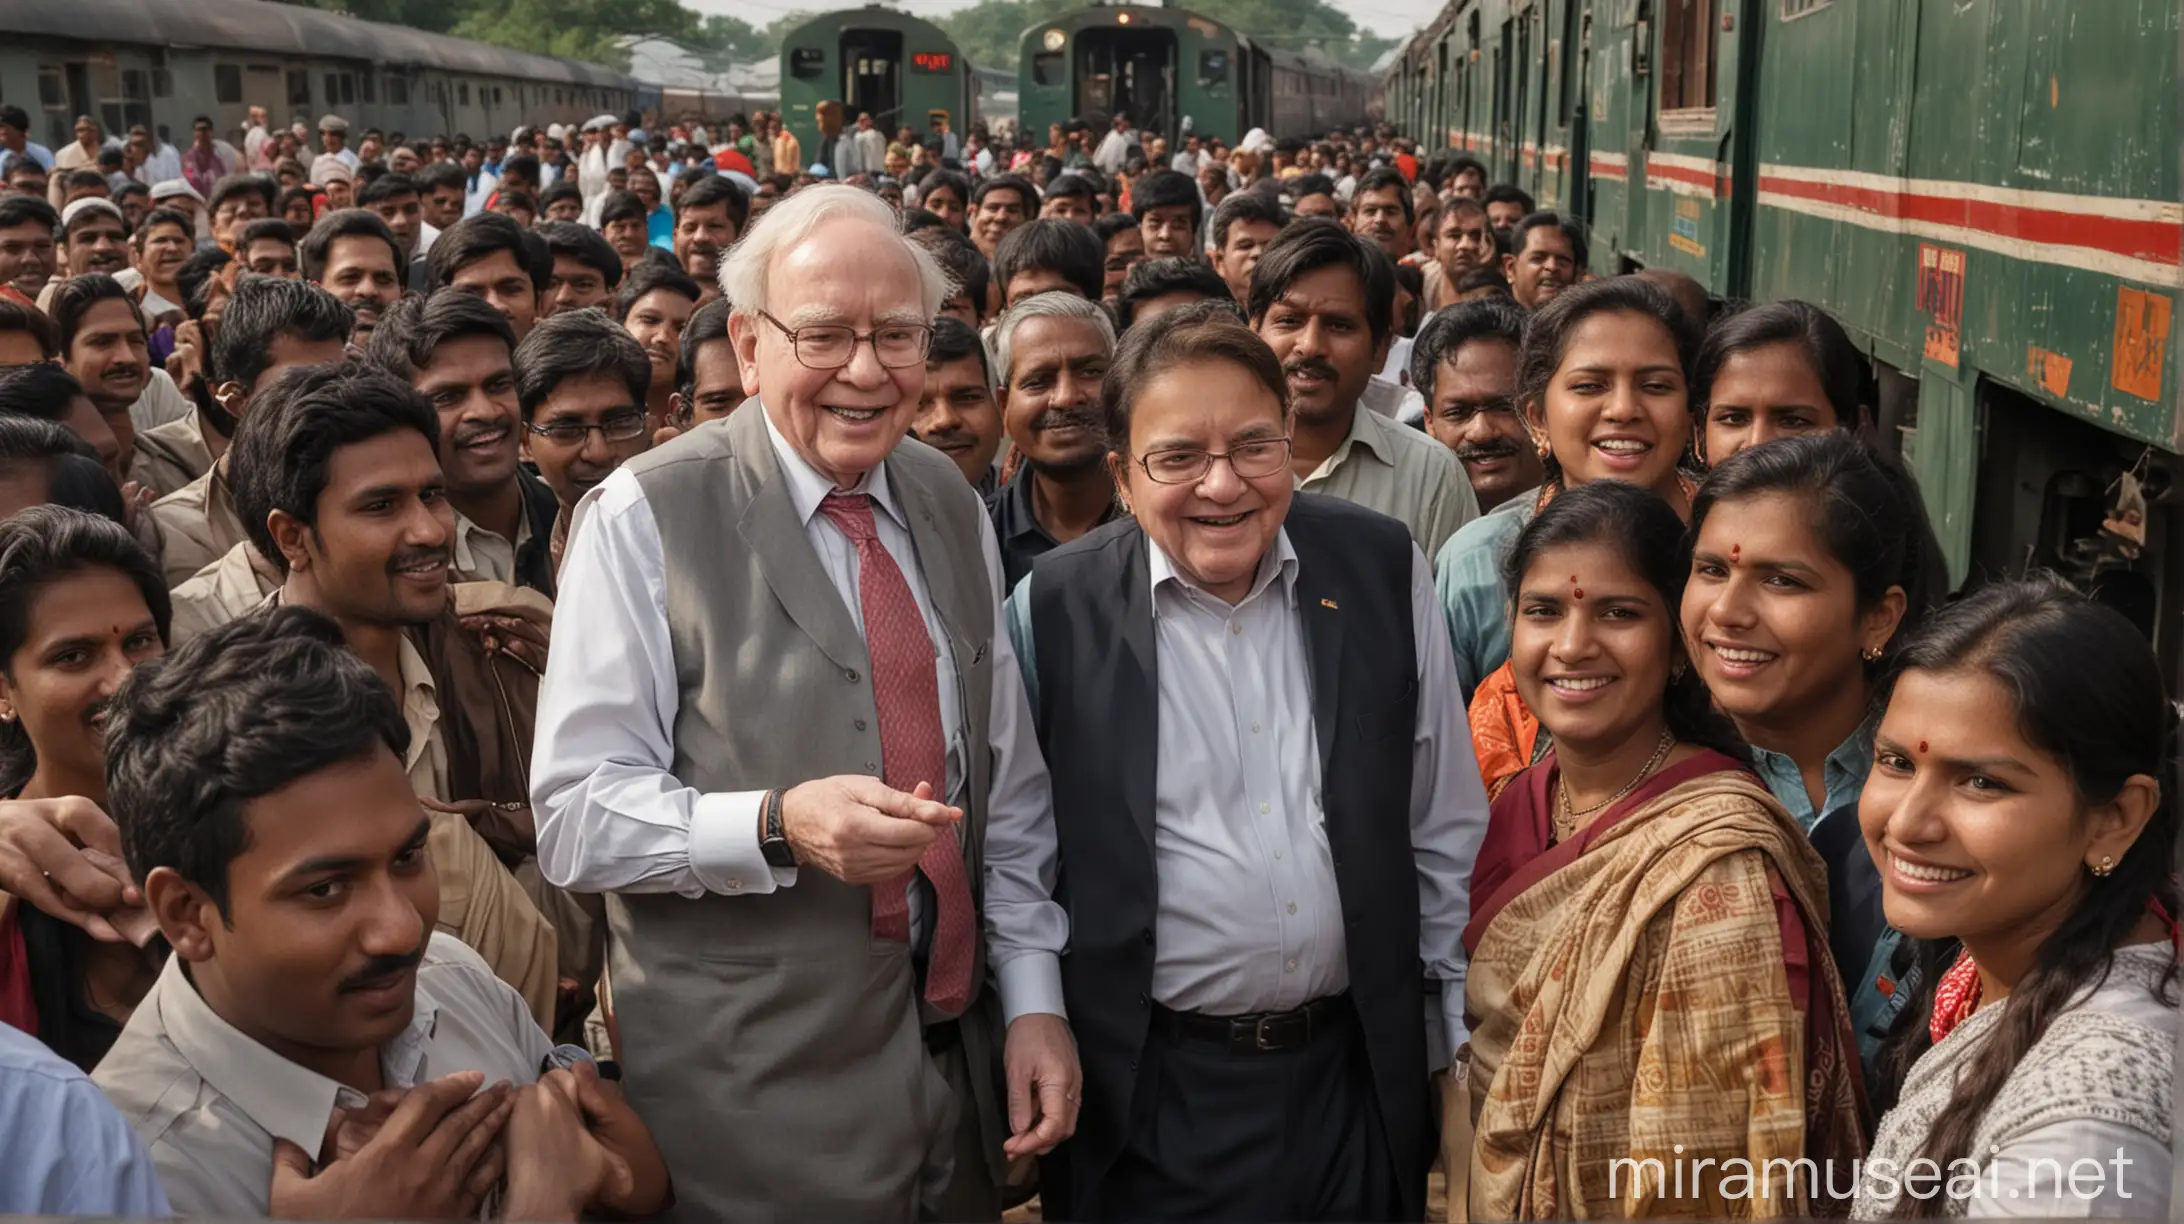 Warren Buffett  traveling in a local Indian train, surrounded by Indian people. Capture the essence of cultural exchange and Warren Buffett 's immersion in the local Indian experience